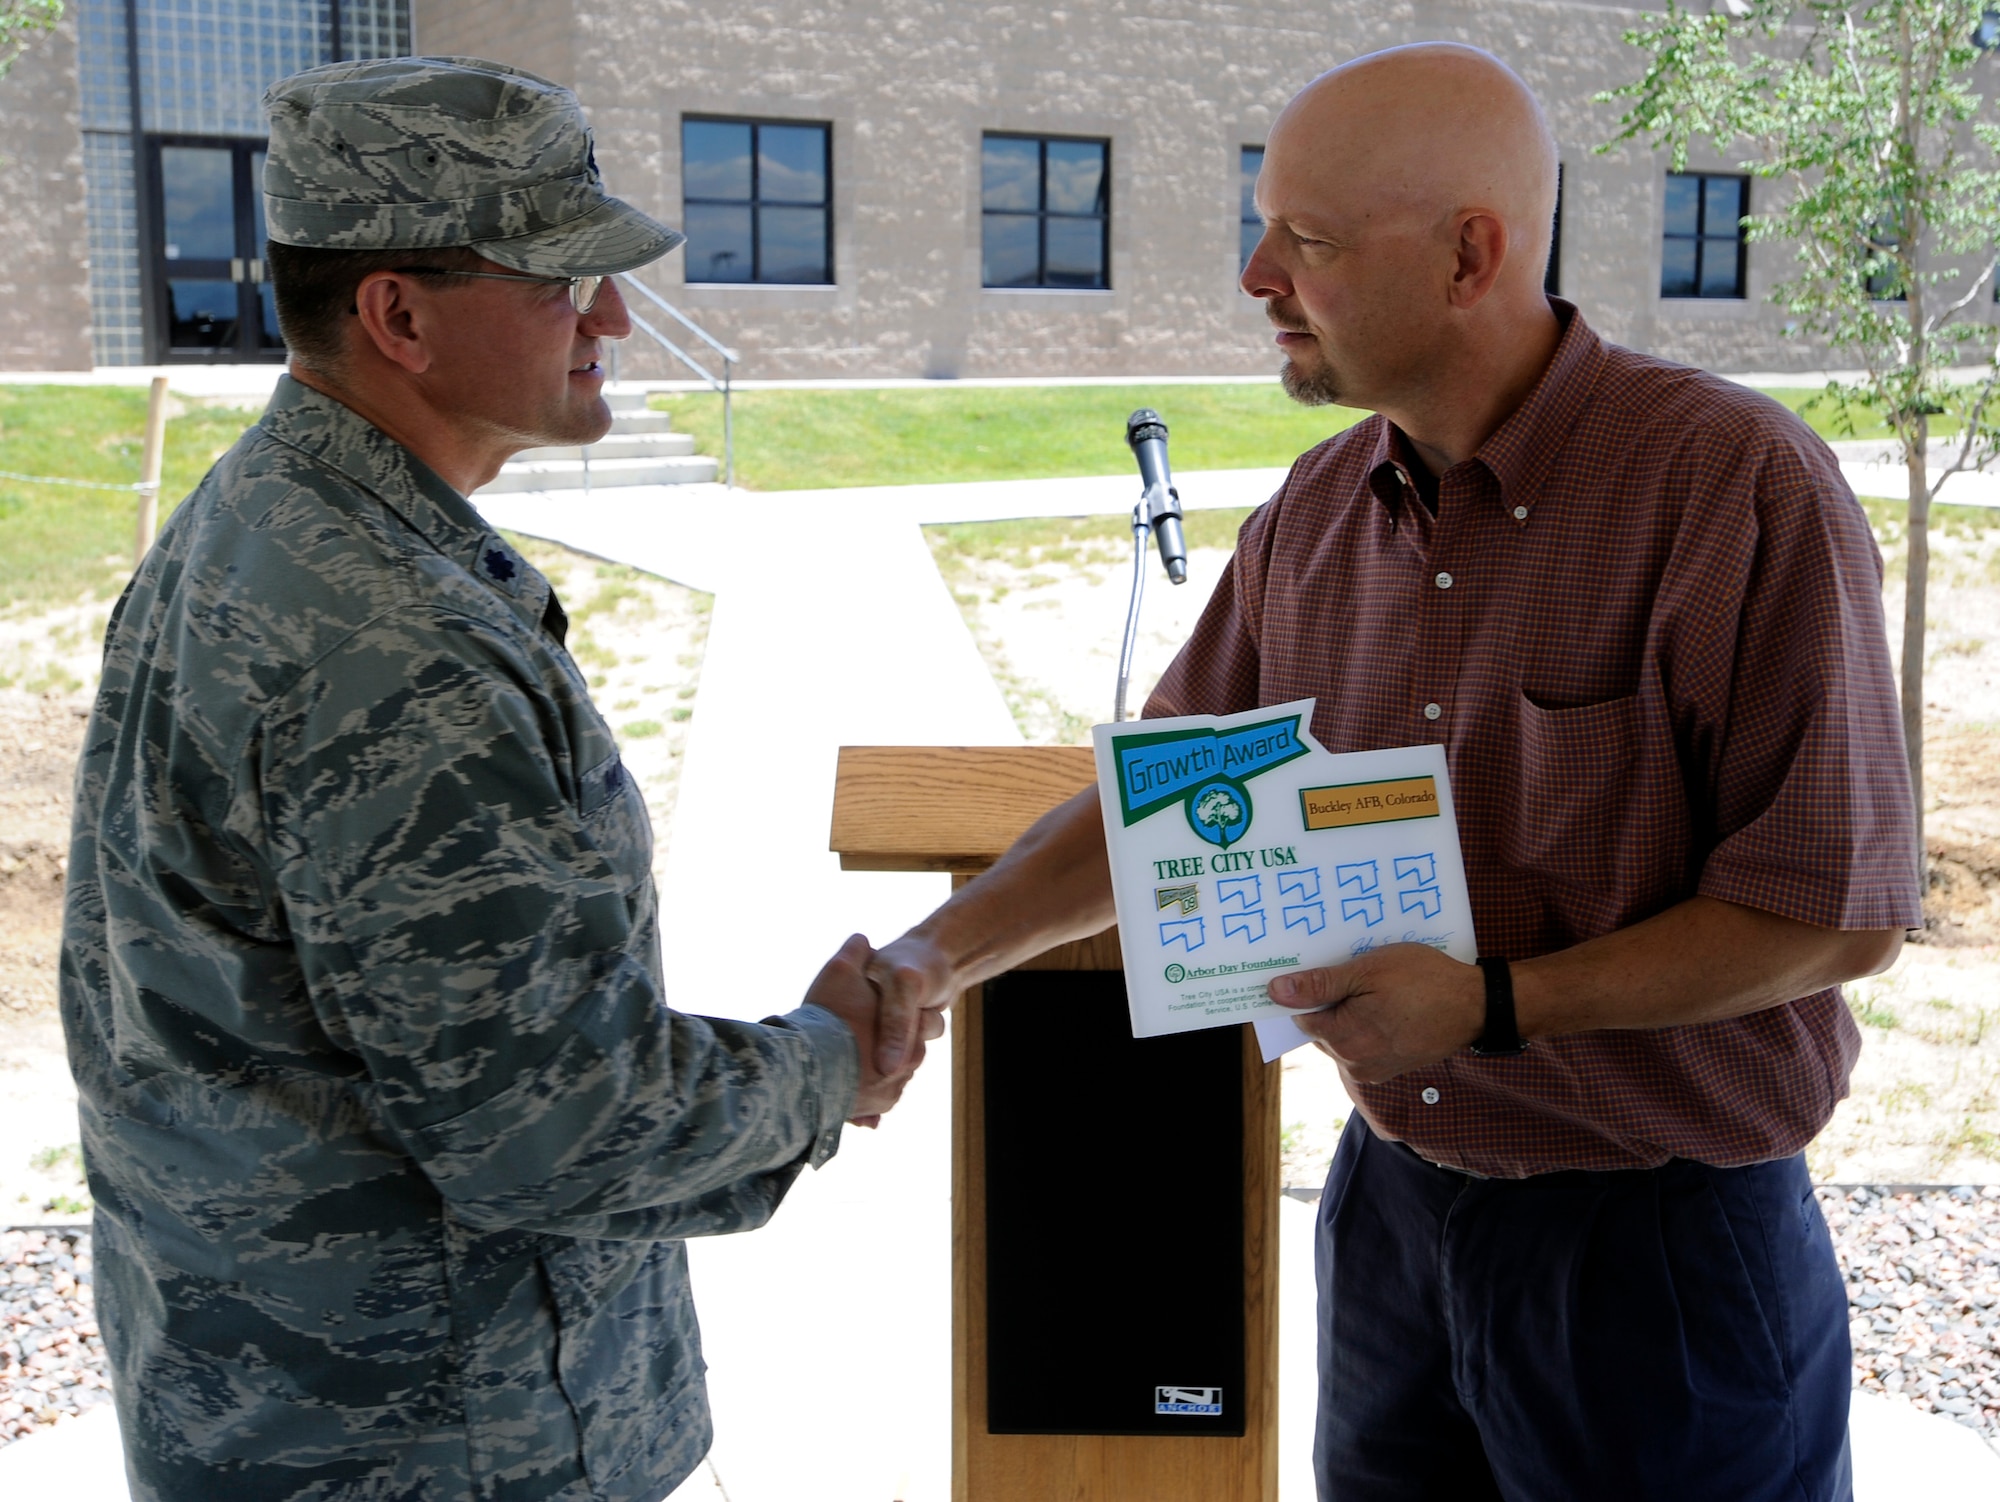 BUCKLEY AIR FORCE BASE, Colo. -- Keith Wood, a Colorado State Forester, presents Lt. Col. William Morrison, 460th Mission Support Group deputy commander, the Tree City USA award during the Arbor Day Celebration June 30. (U.S. Air Force photo by Staff Sgt. Dallas Edwards)